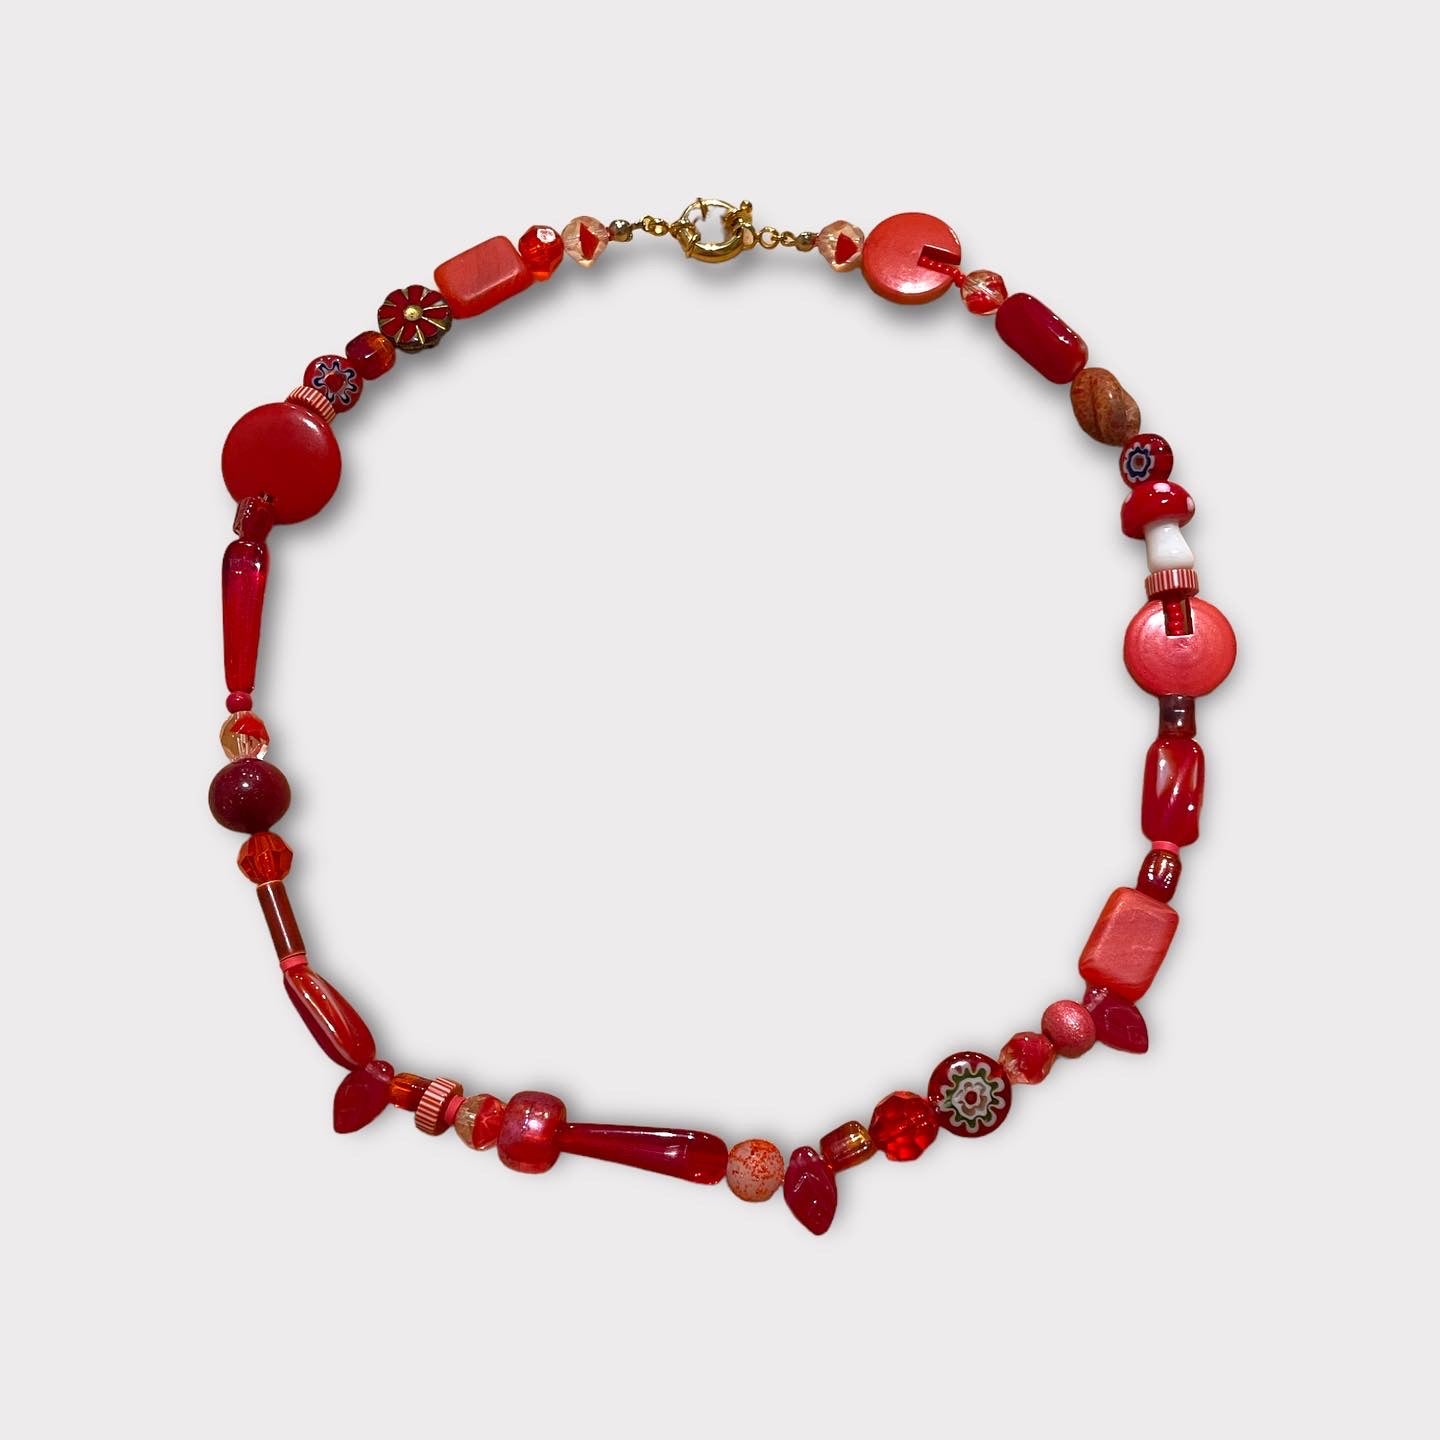 [NMB23001]One of a kind necklace - RED CHERRY -